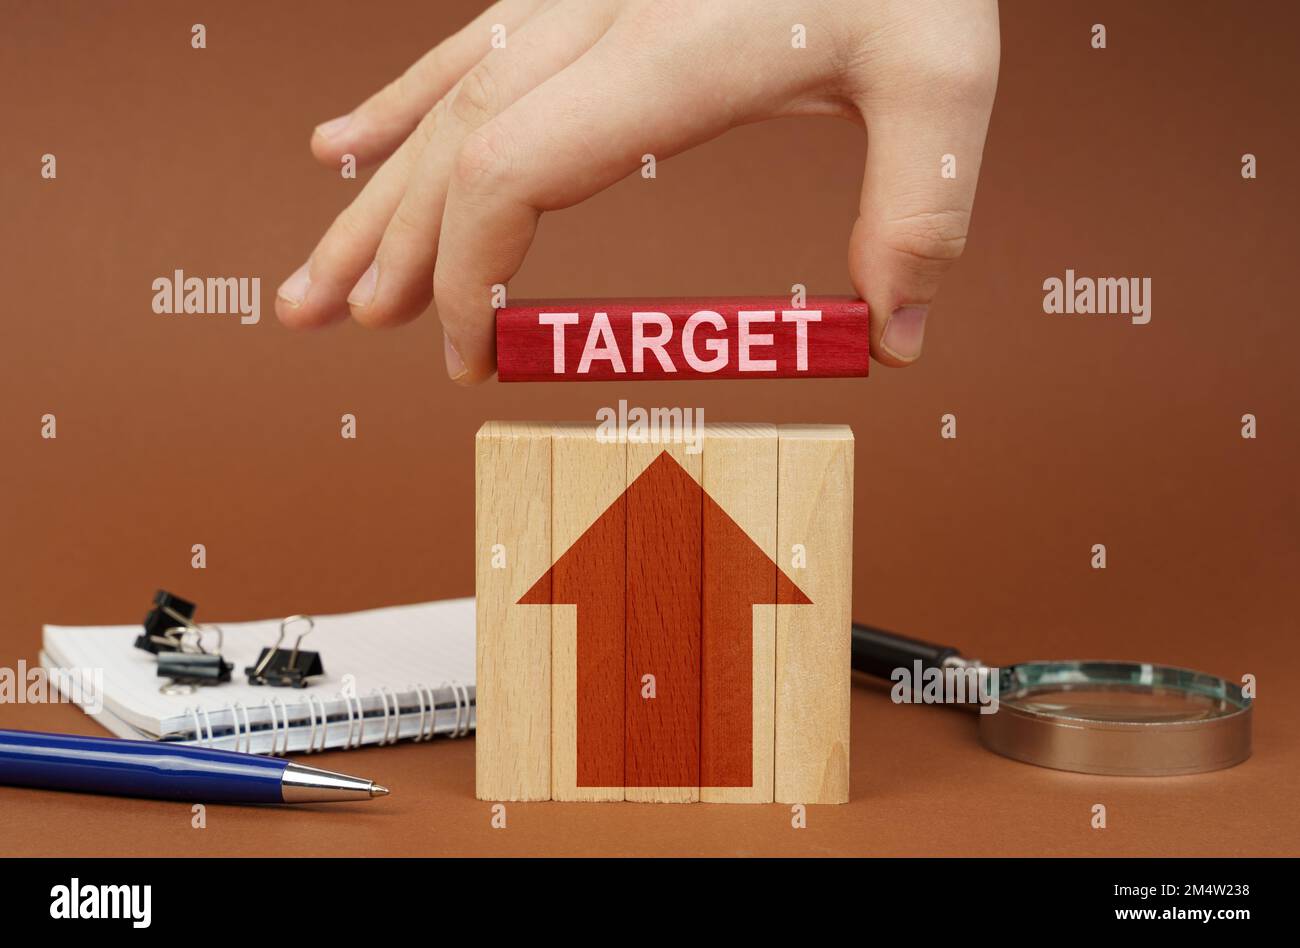 Business concept. On a brown surface are office items, wooden blocks, in the hand is a red block with the inscription - Target Stock Photo